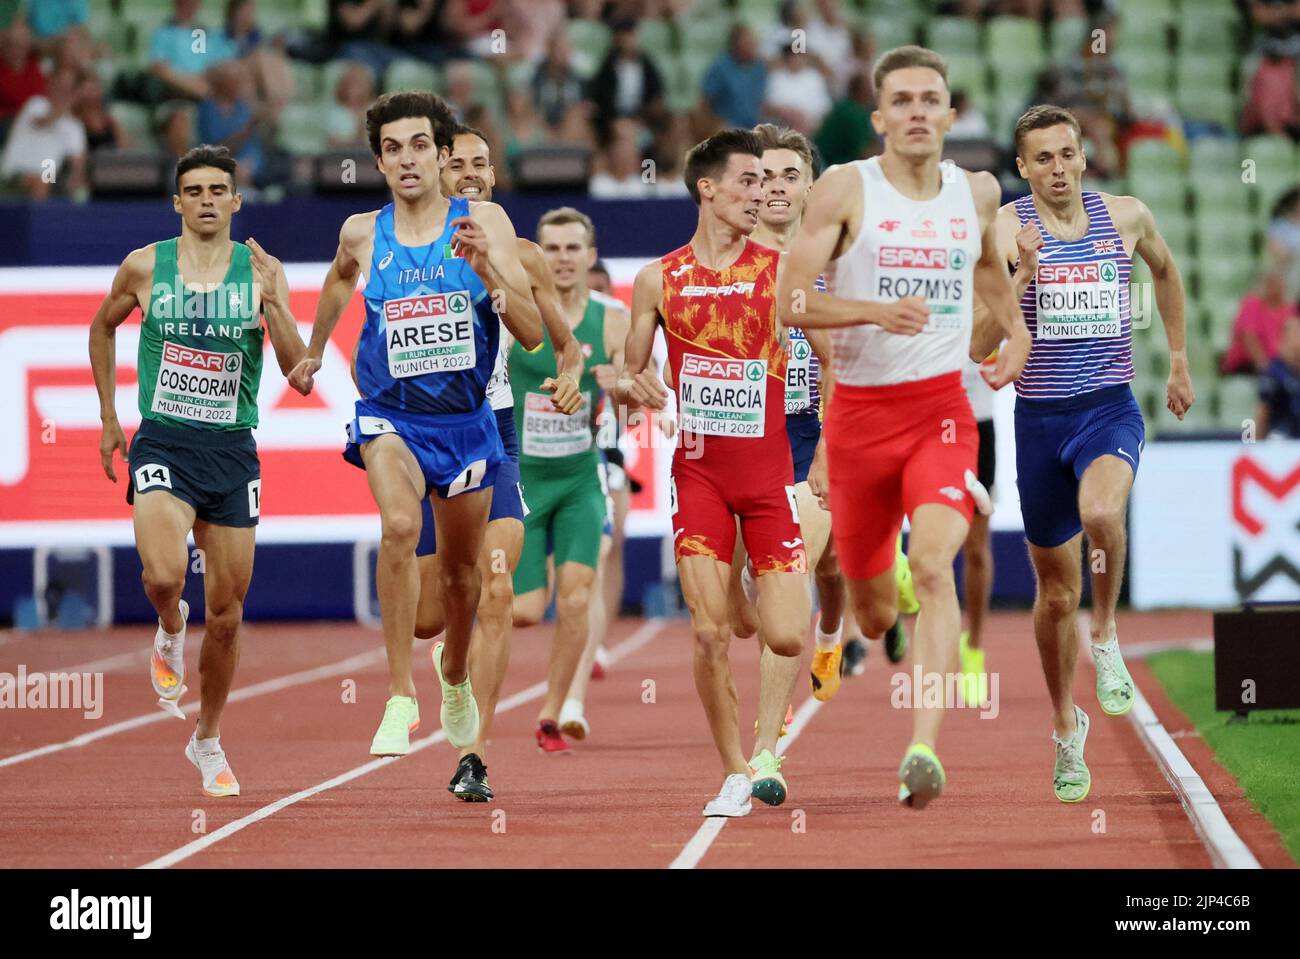 Athletics - 2022 European Championships - Olympiastadion, Munich, Germany - August 15, 2022  Poland's Michal Rozmys, Spain's Mario Garcia, Britain's Neil Gourley and Italy's Pietro Arese in action during men's 1500 metres heat 2 REUTERS/Wolfgang Rattay Stock Photo